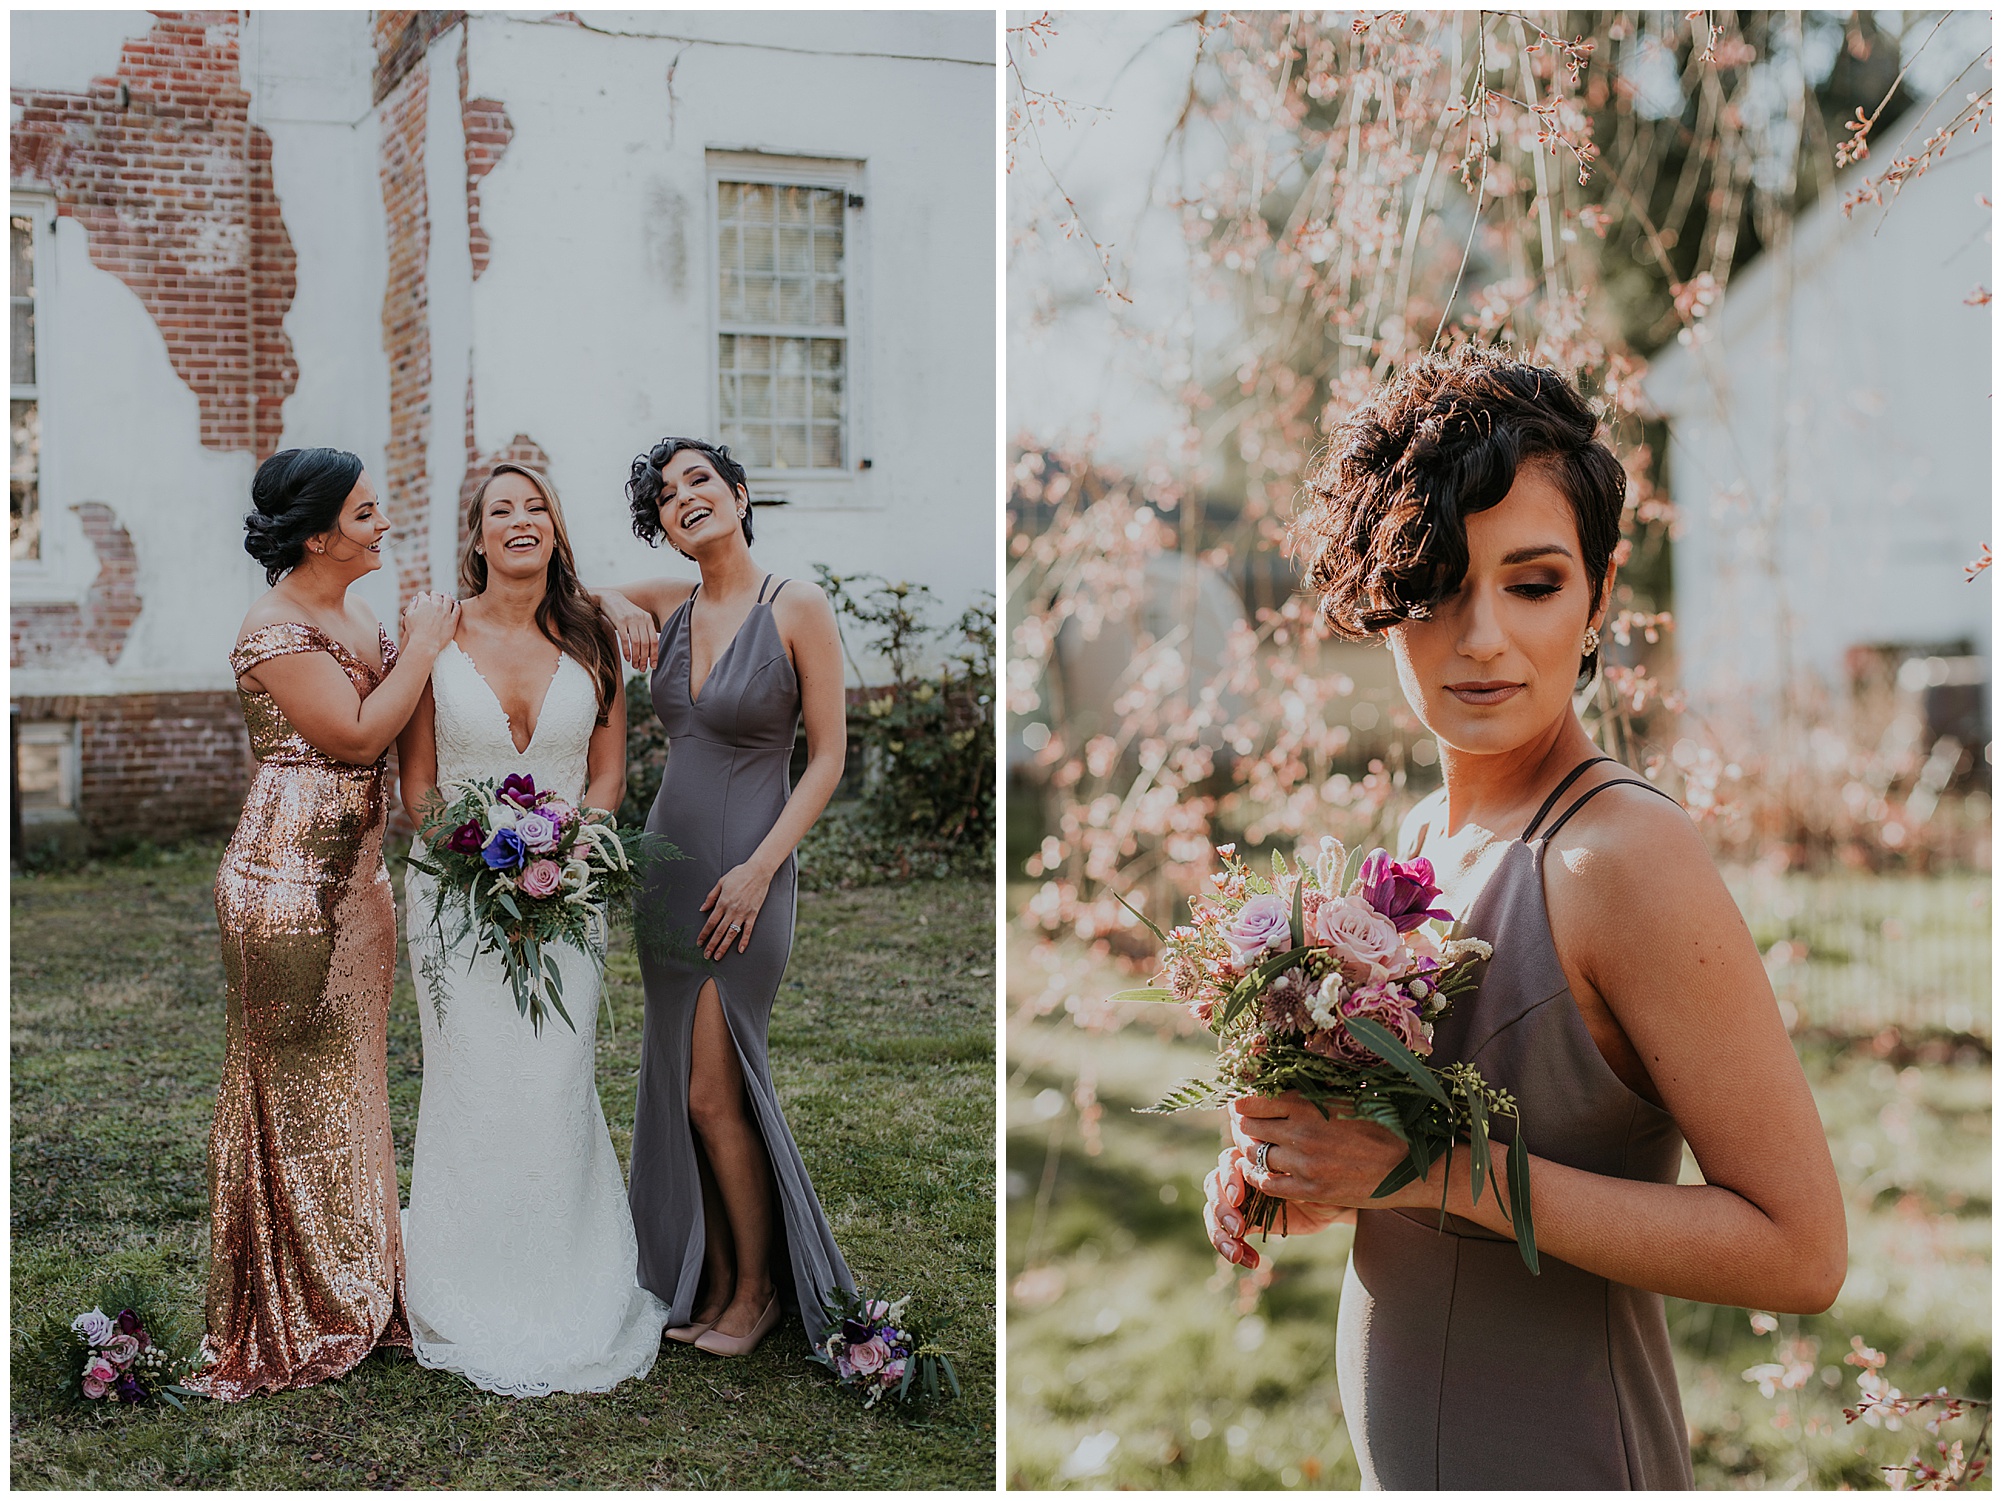 glamorous and boho style wedding theme at chanceford hall bed and breakfast. bride and bridesmaids outdoors at historic venue. maryland wedding now featured on my eastern shore wedding.